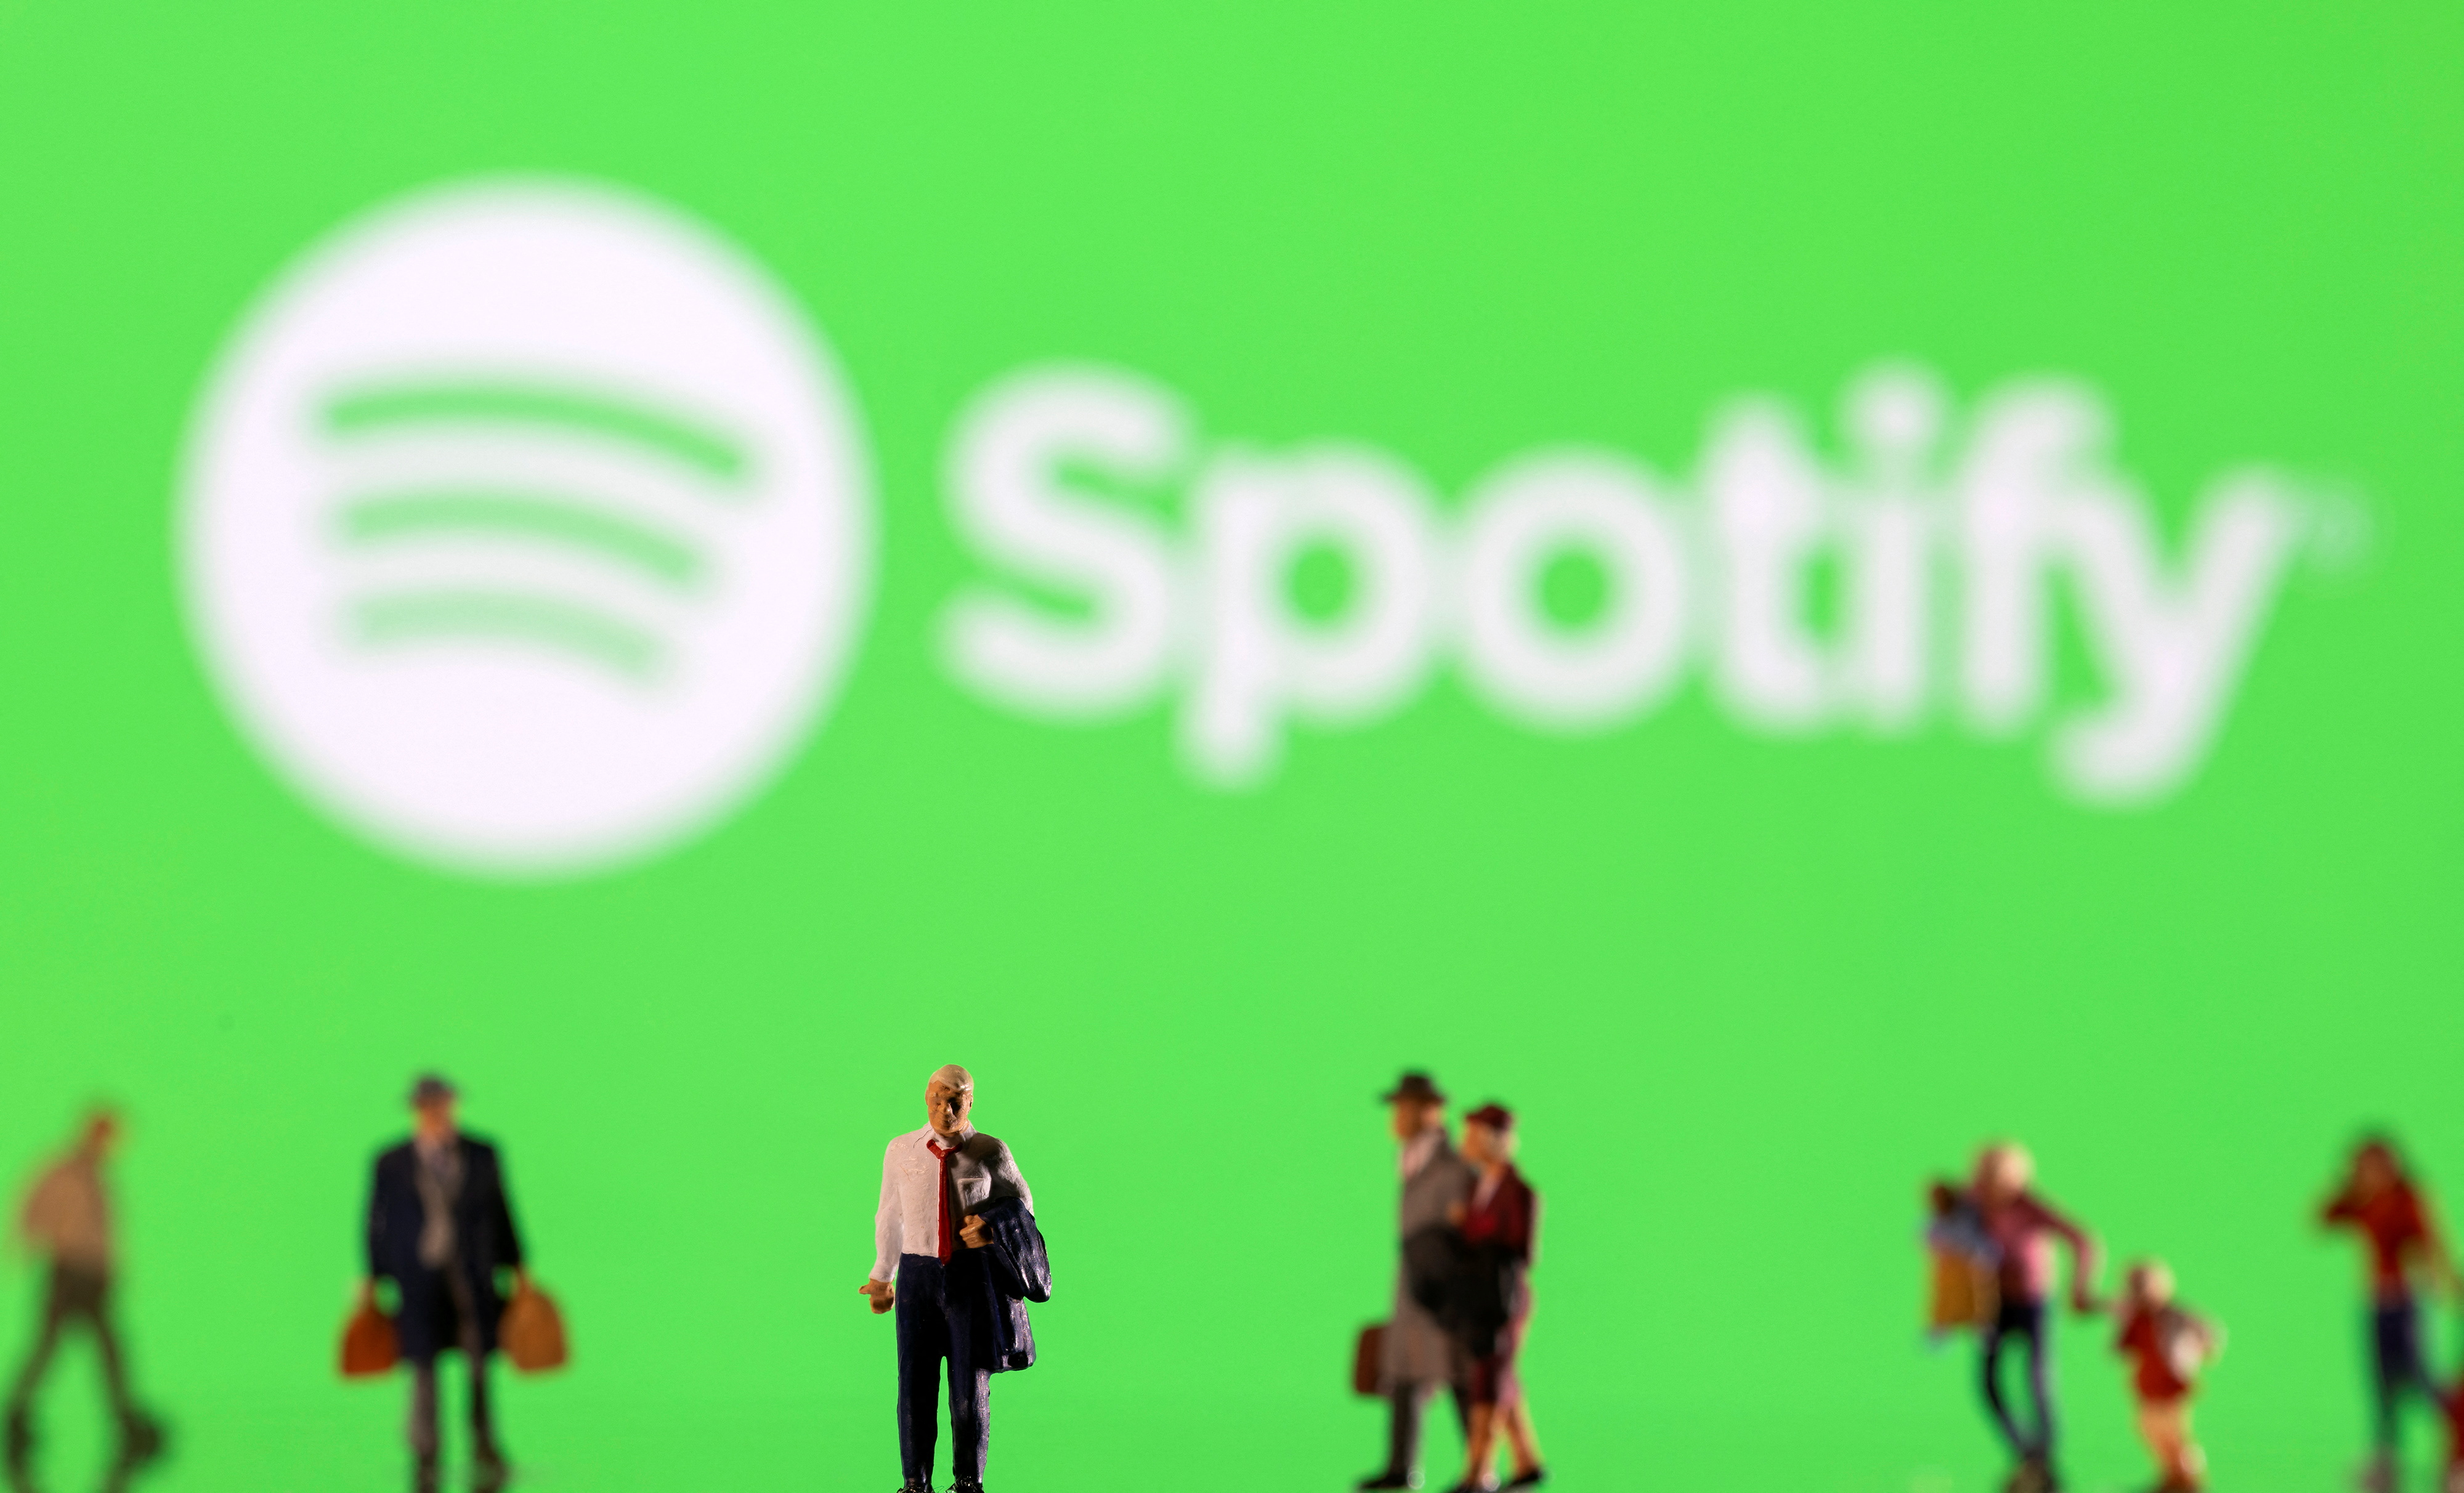 The illustration shows small figures and shows the Spotify logo